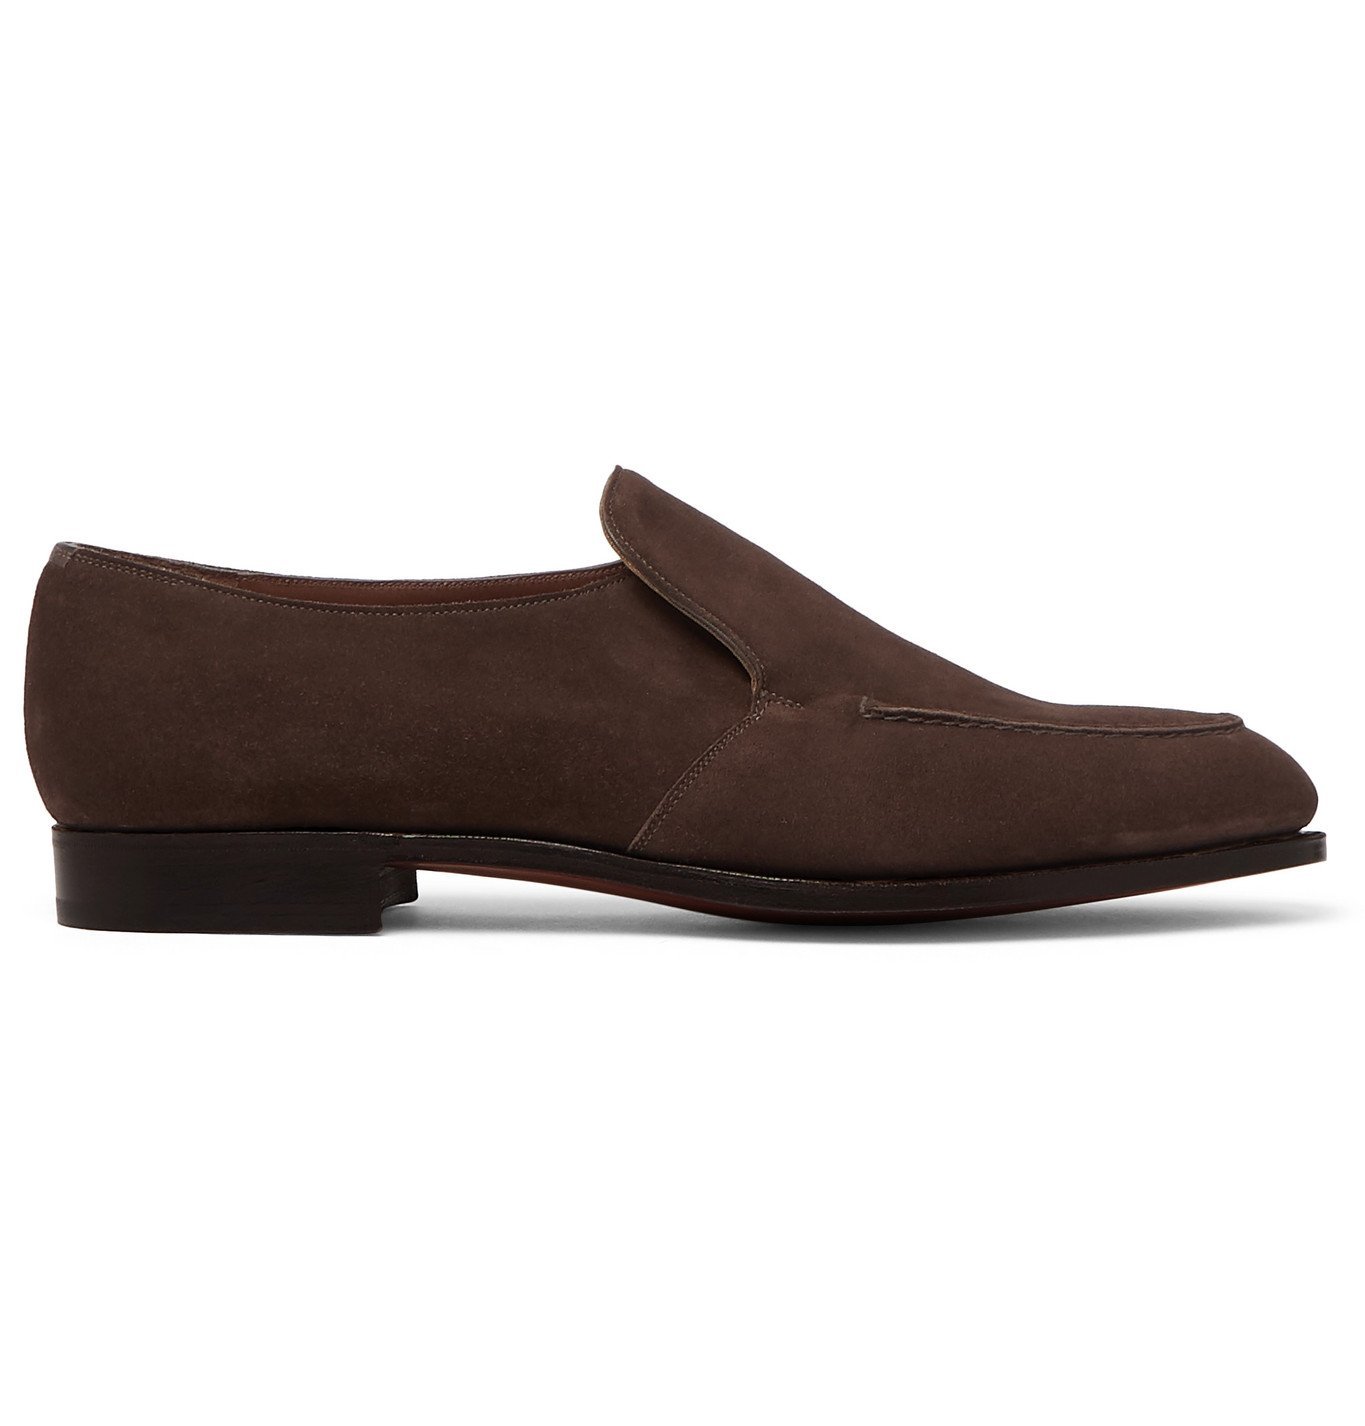 Edward Green - Lewes Suede Loafers - Brown Edward Green